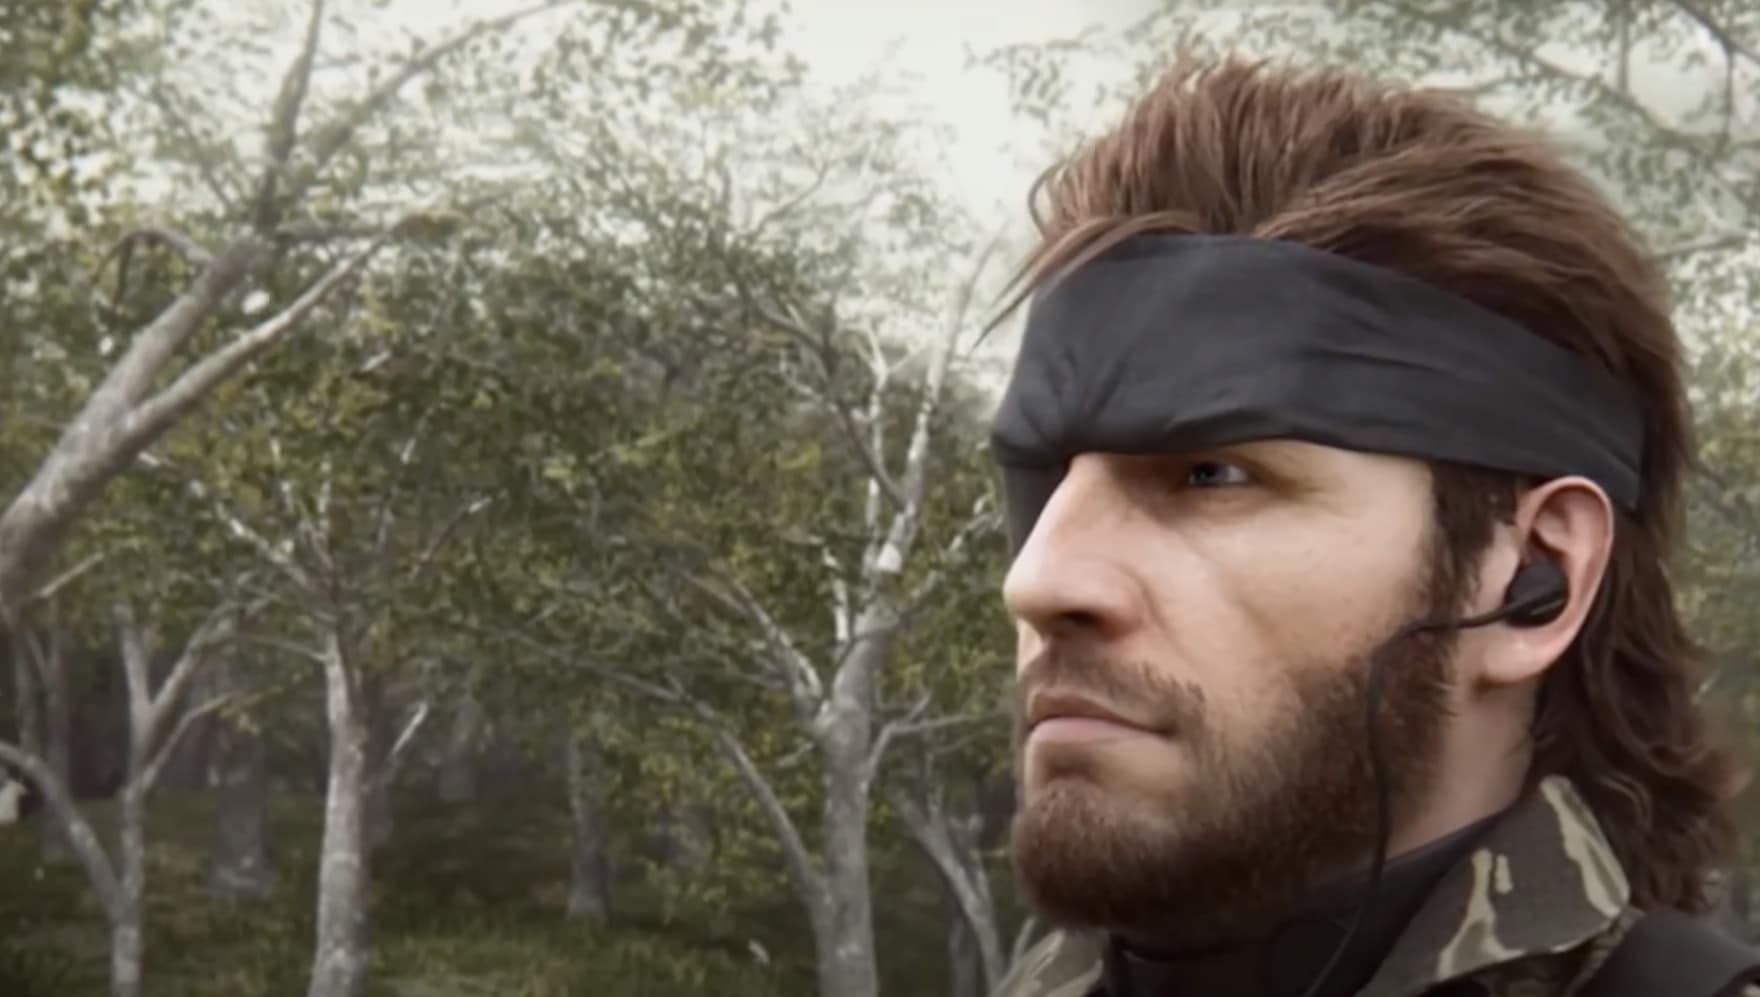 Metal Gear Solid 3 Remake Announced Alongside Collection Featuring